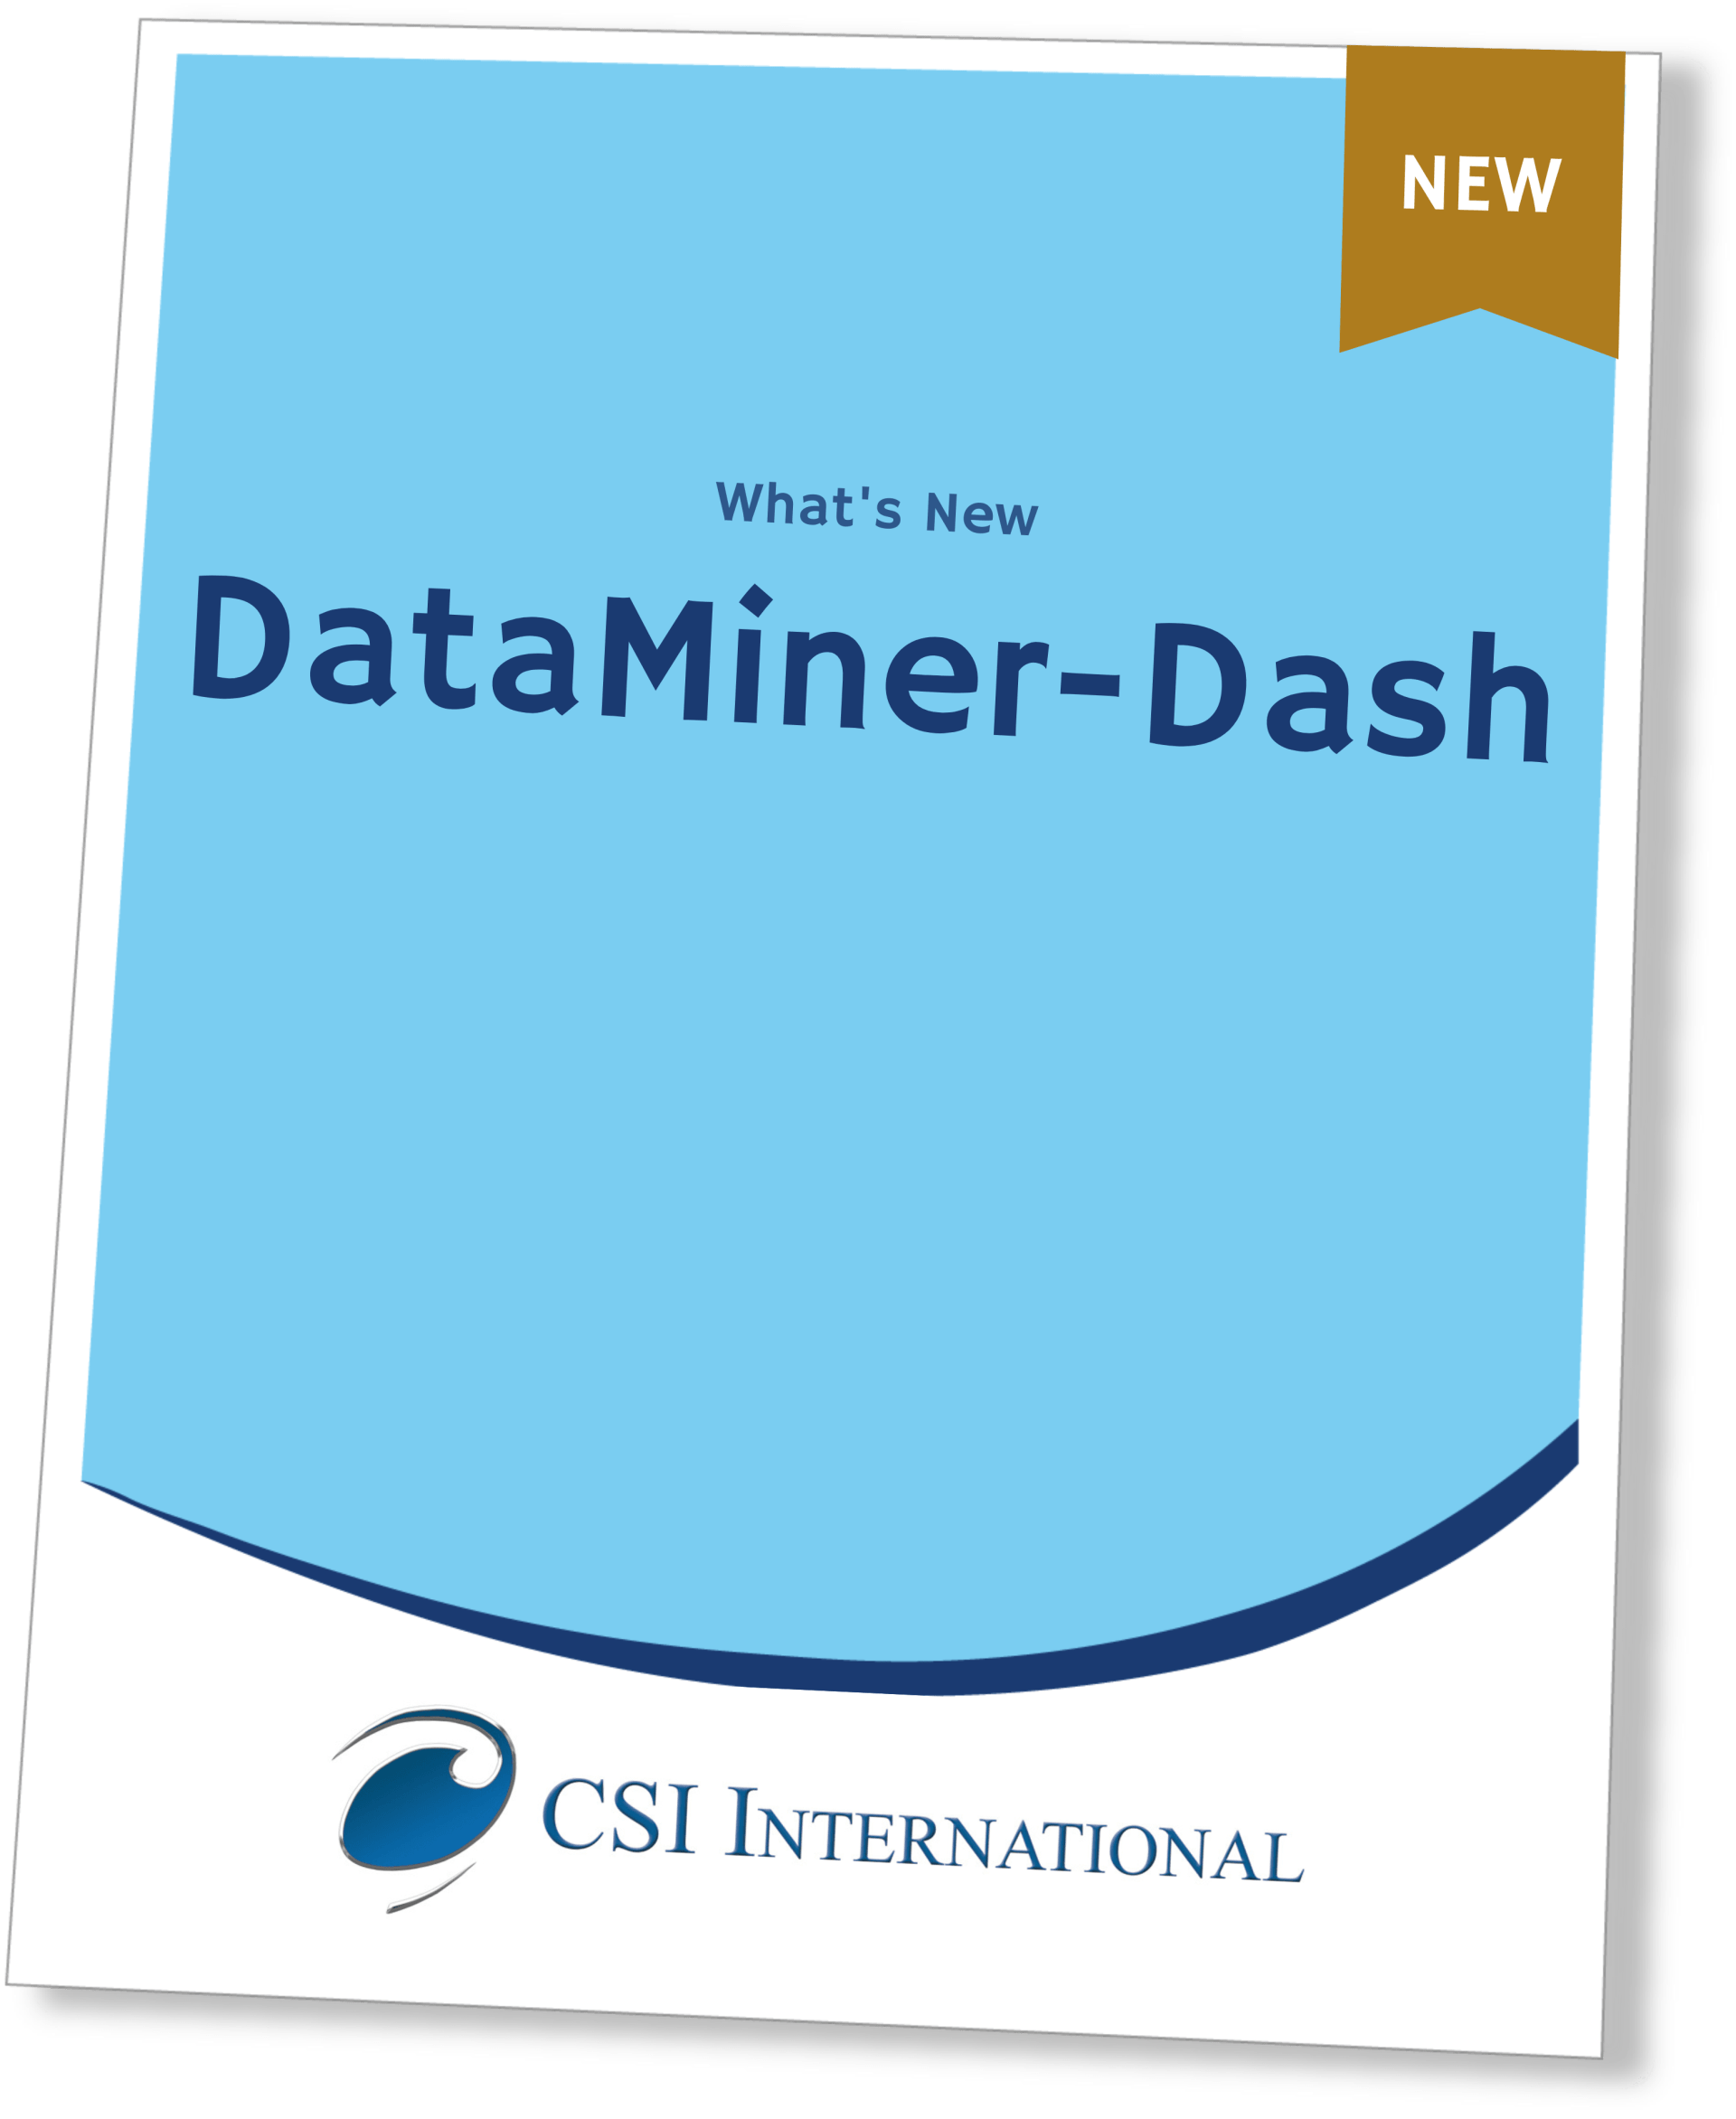 DataMiner-Dash logo linked to the DataMiner-Dash 8.5.1 What's New document